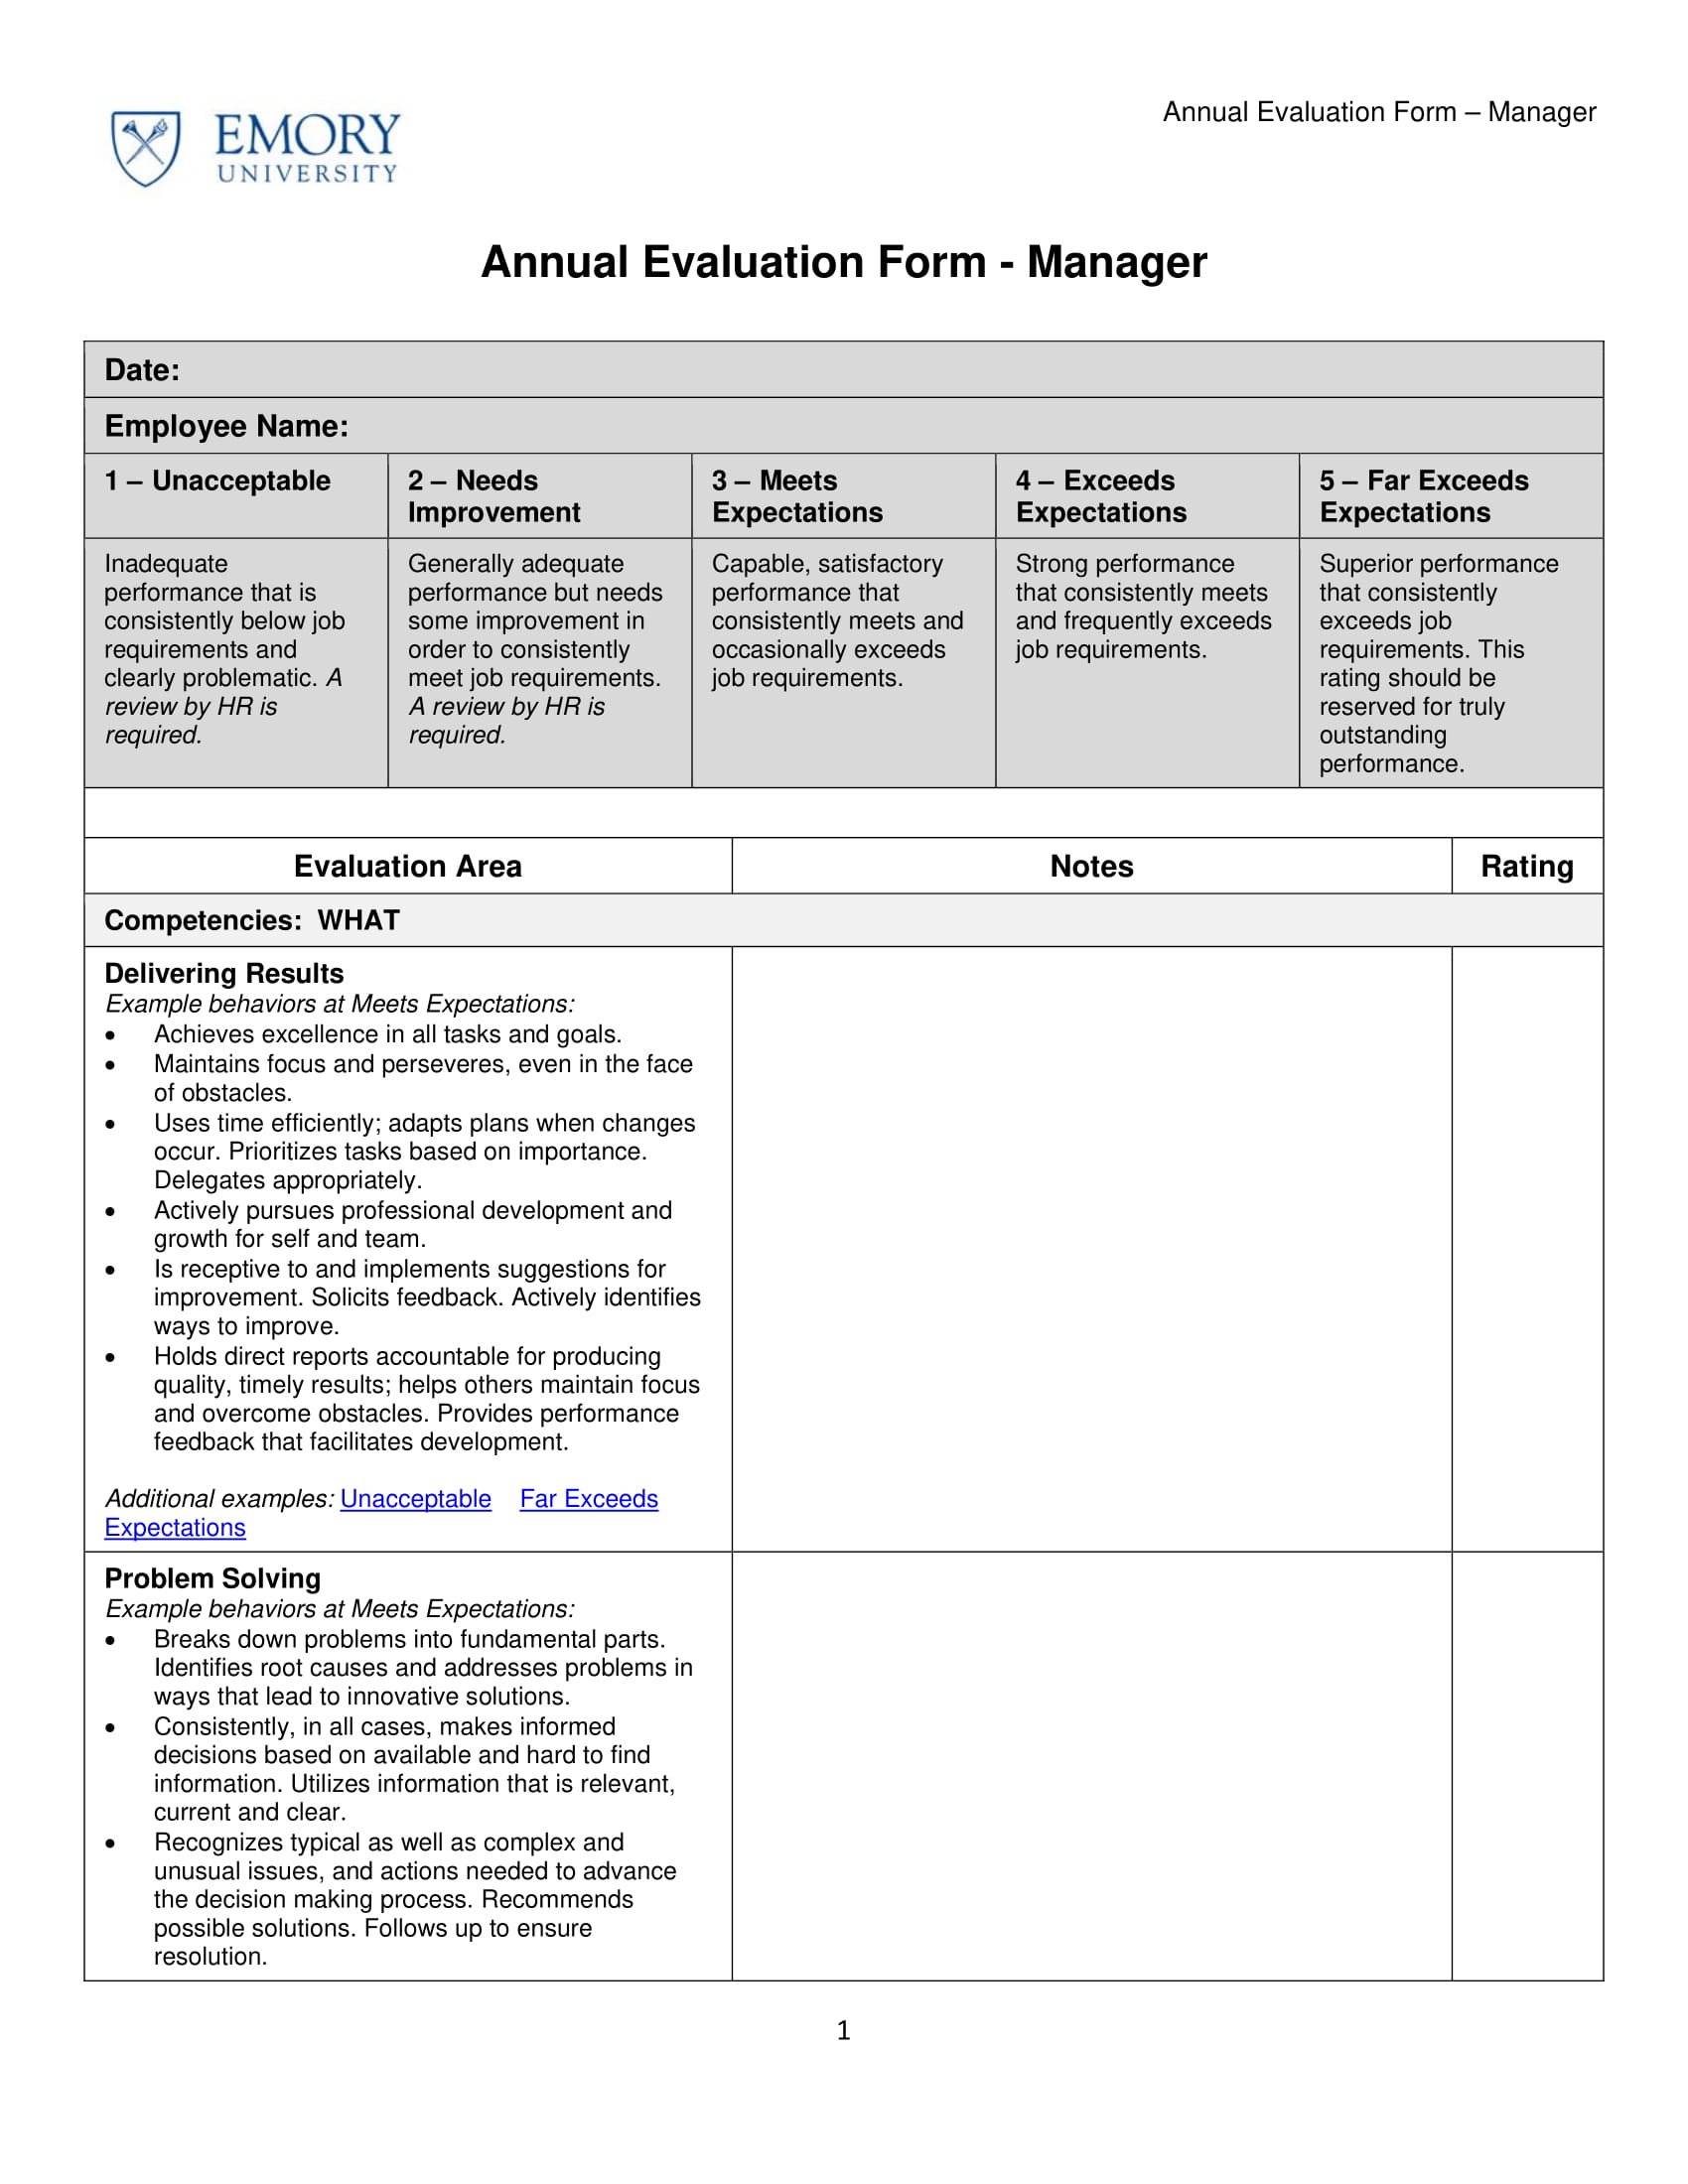 annual manager evaluation form 1